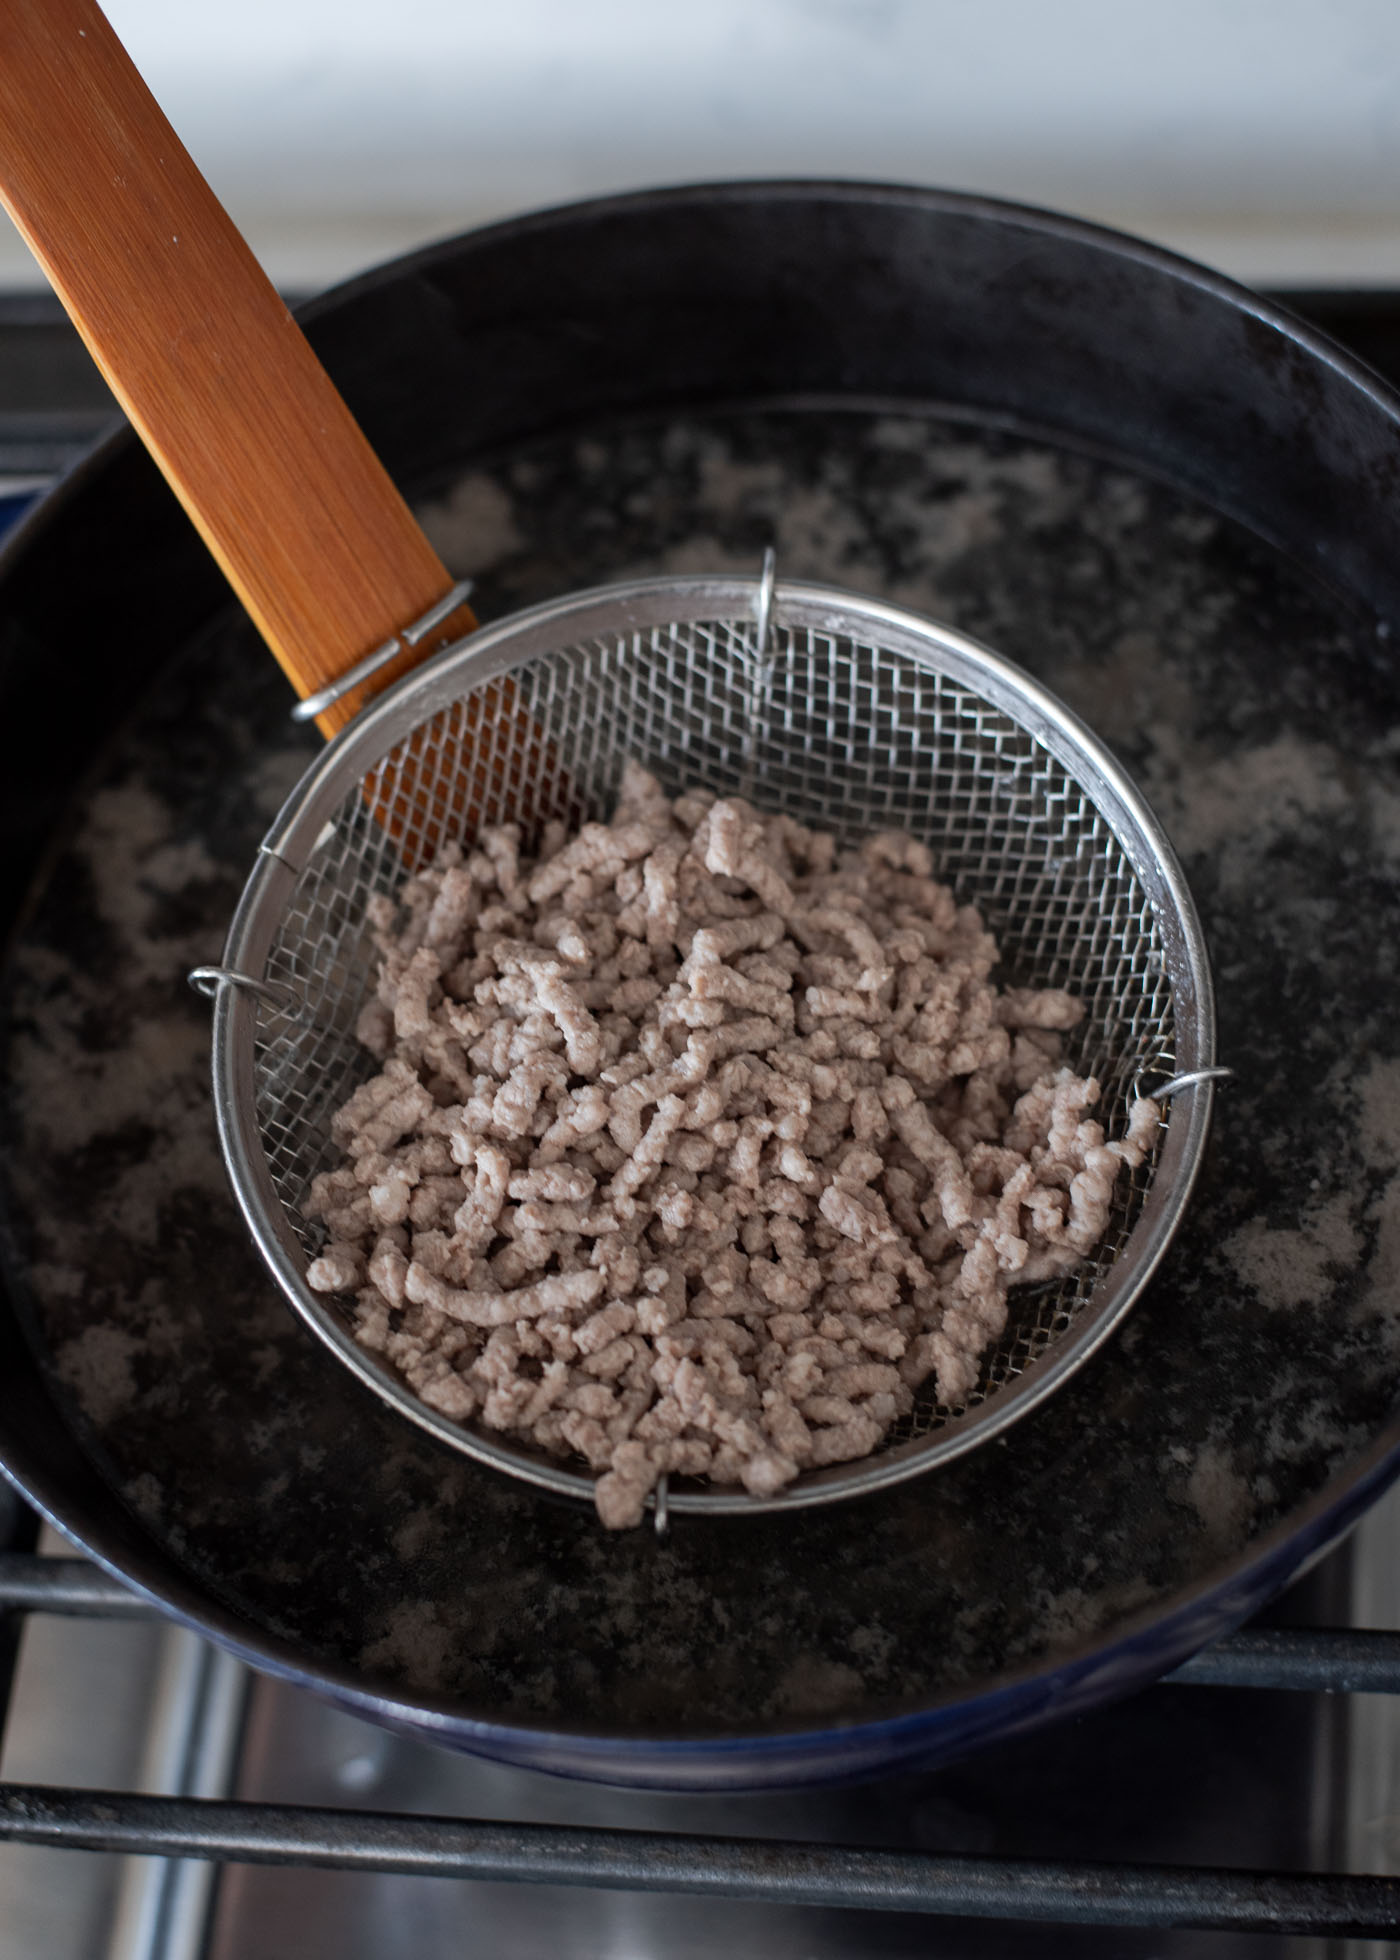 A wired skimmer is collecting cooked minced pork from the simmering water in a pot.